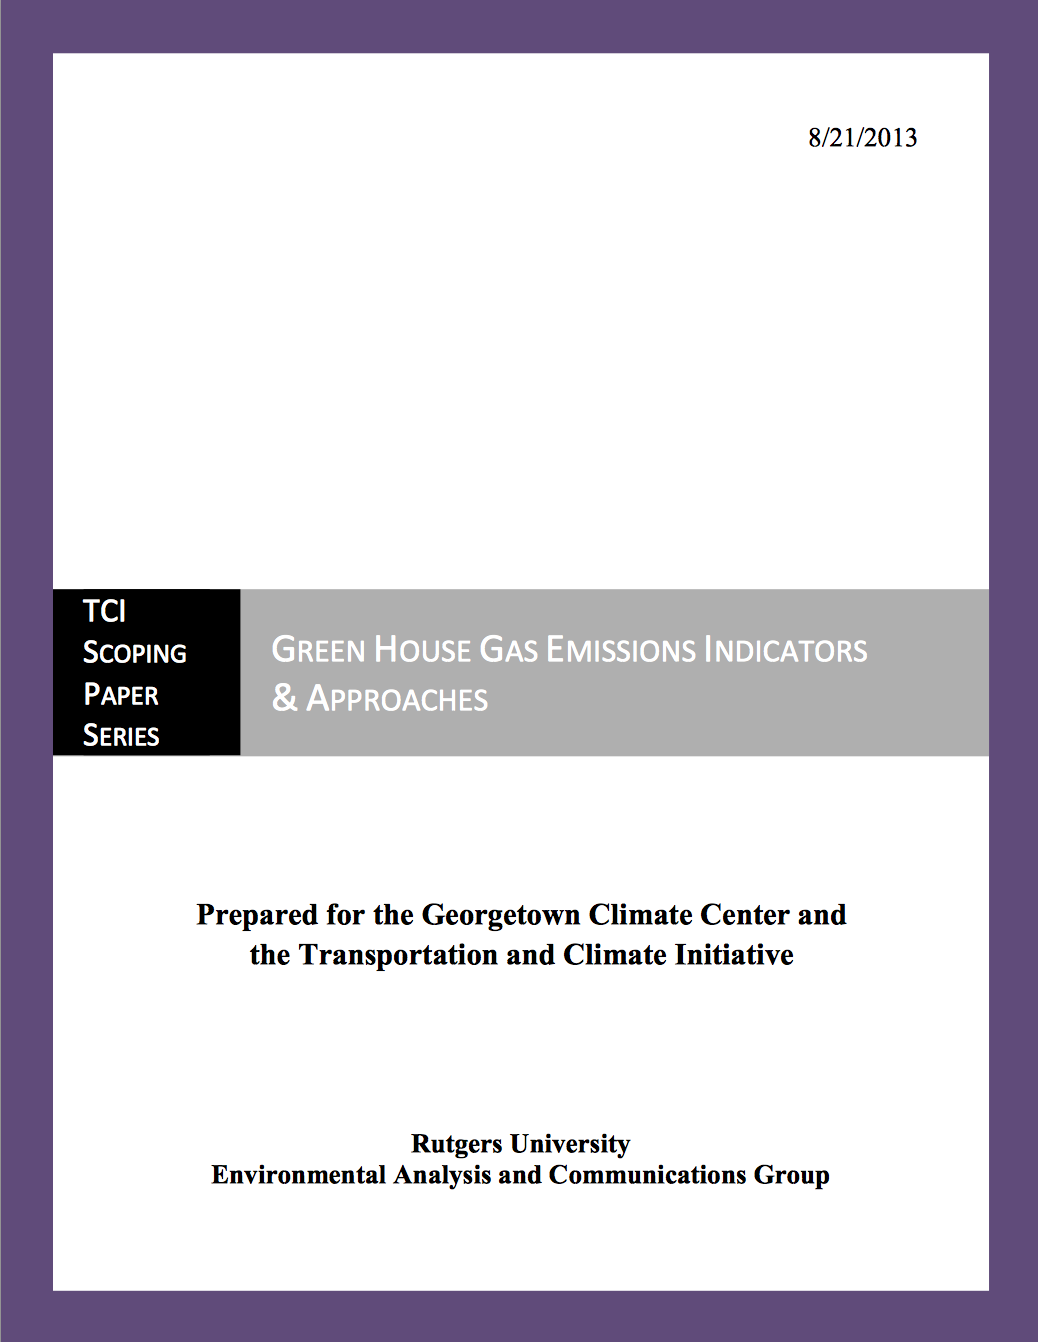 Sustainable Communities Indicators Research Paper Series: Greenhouse Gas Emissions Indicators and Approaches